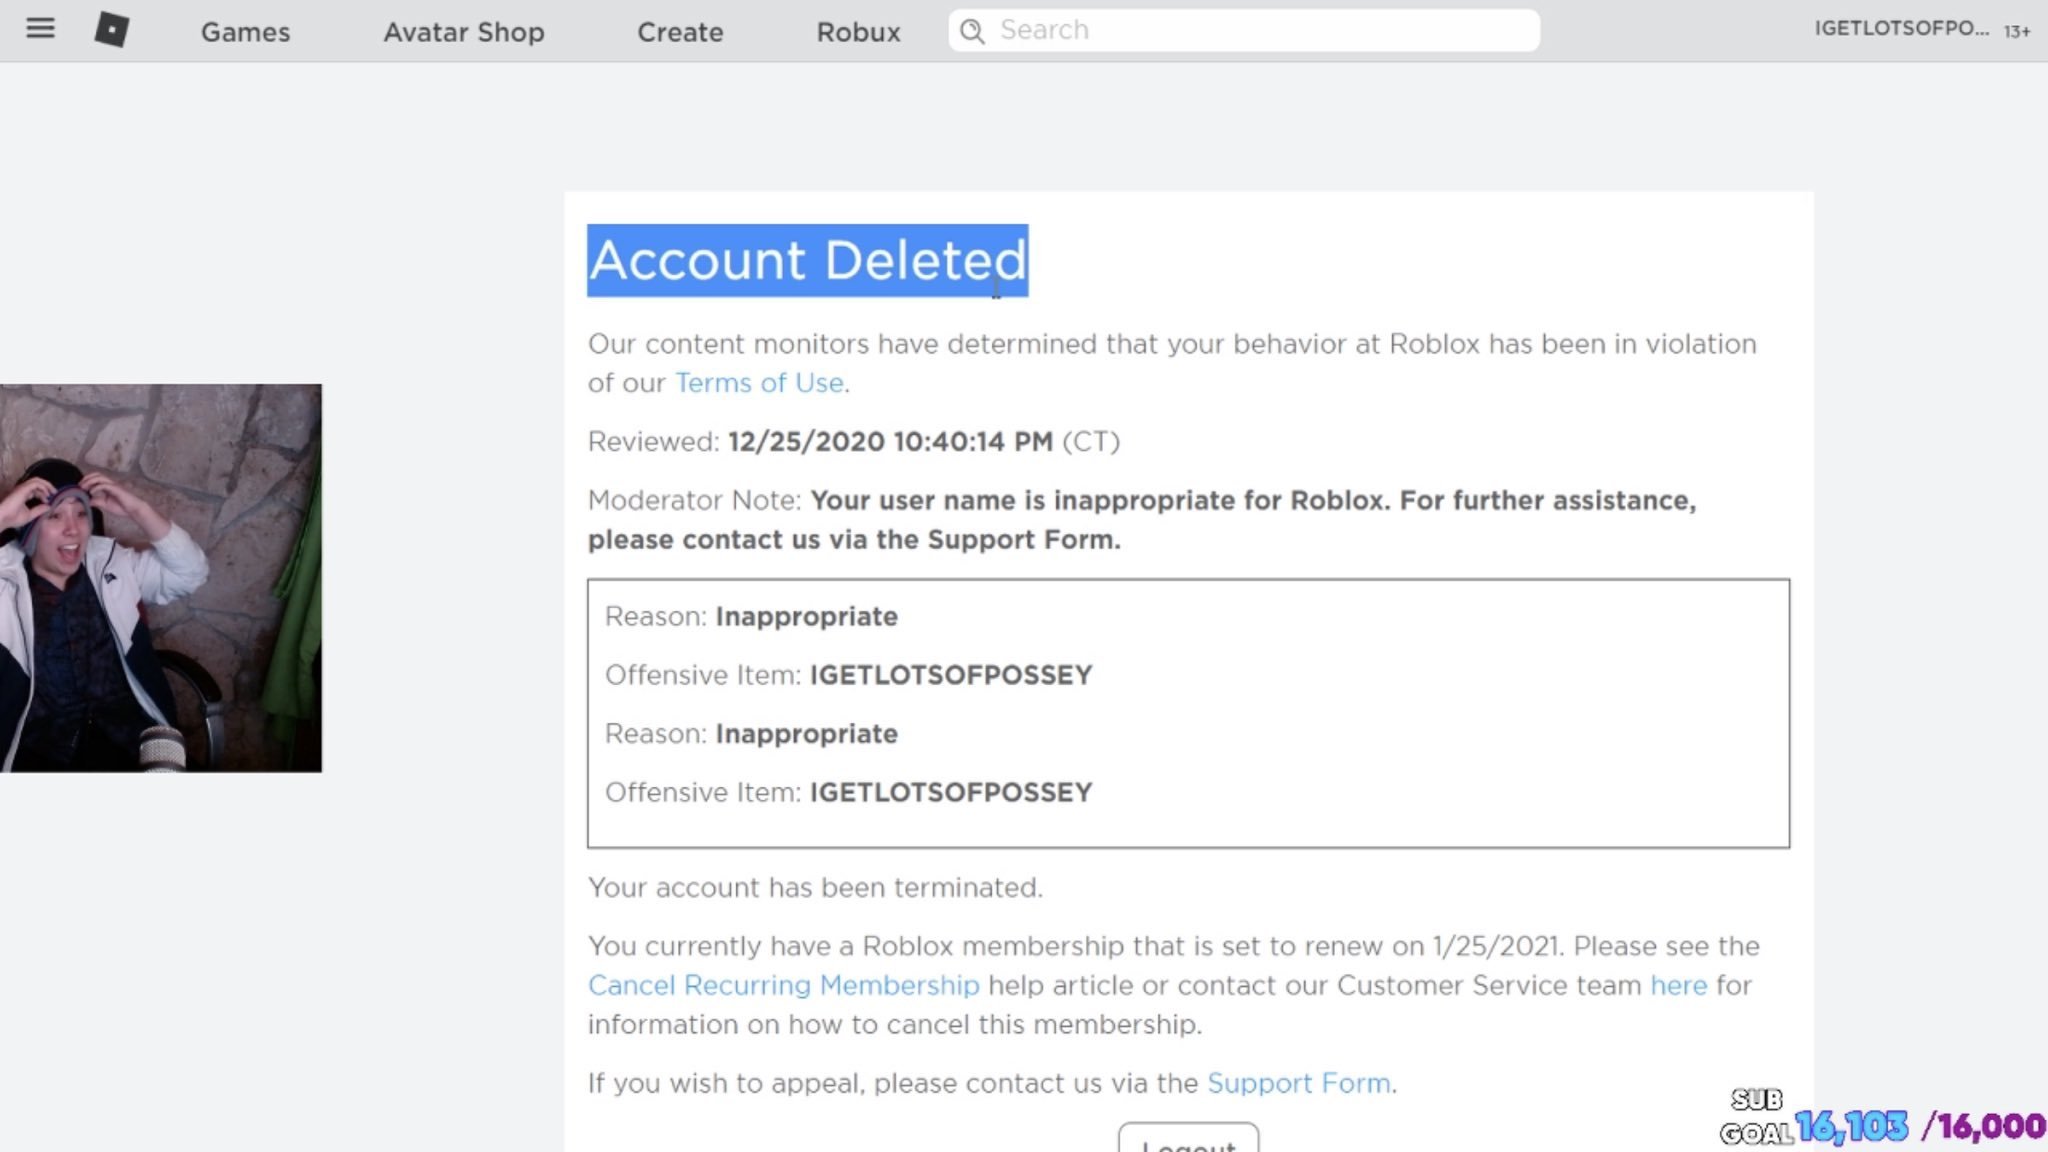 RTC on X: UPDATE: Here is Quackity's moderation note from being banned on  stream. It reads “Account Deleted” “Your username is inappropriate for  Roblox. For further assistance, please contact us using the